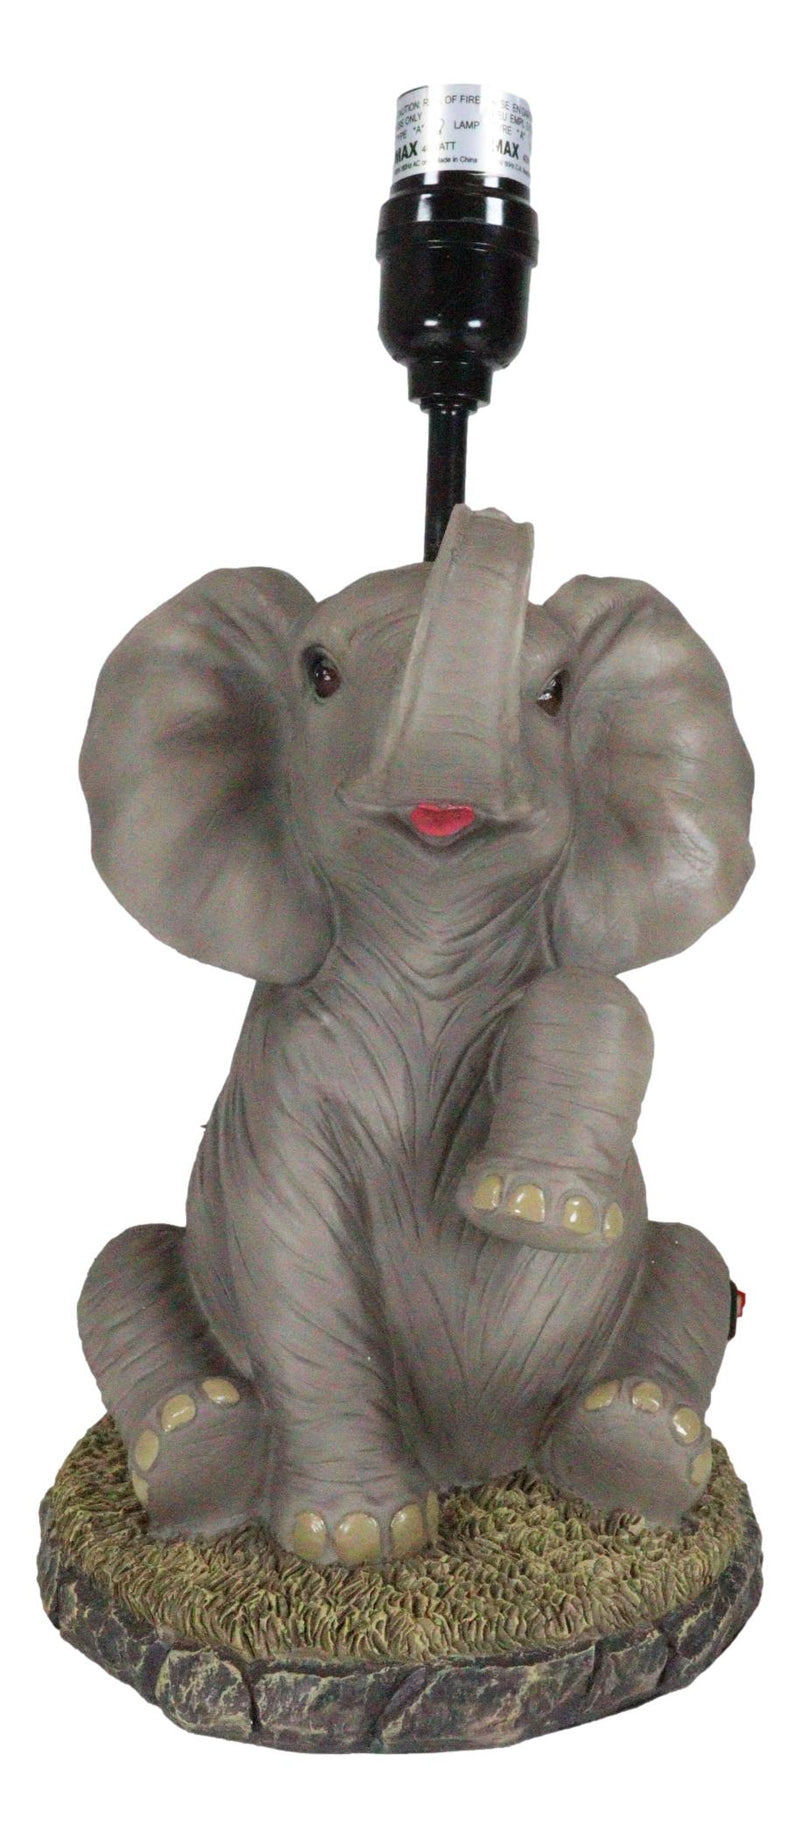 African Safari Glow Sitting Elephant with Trunk Up Desktop Table Lamp With Shade